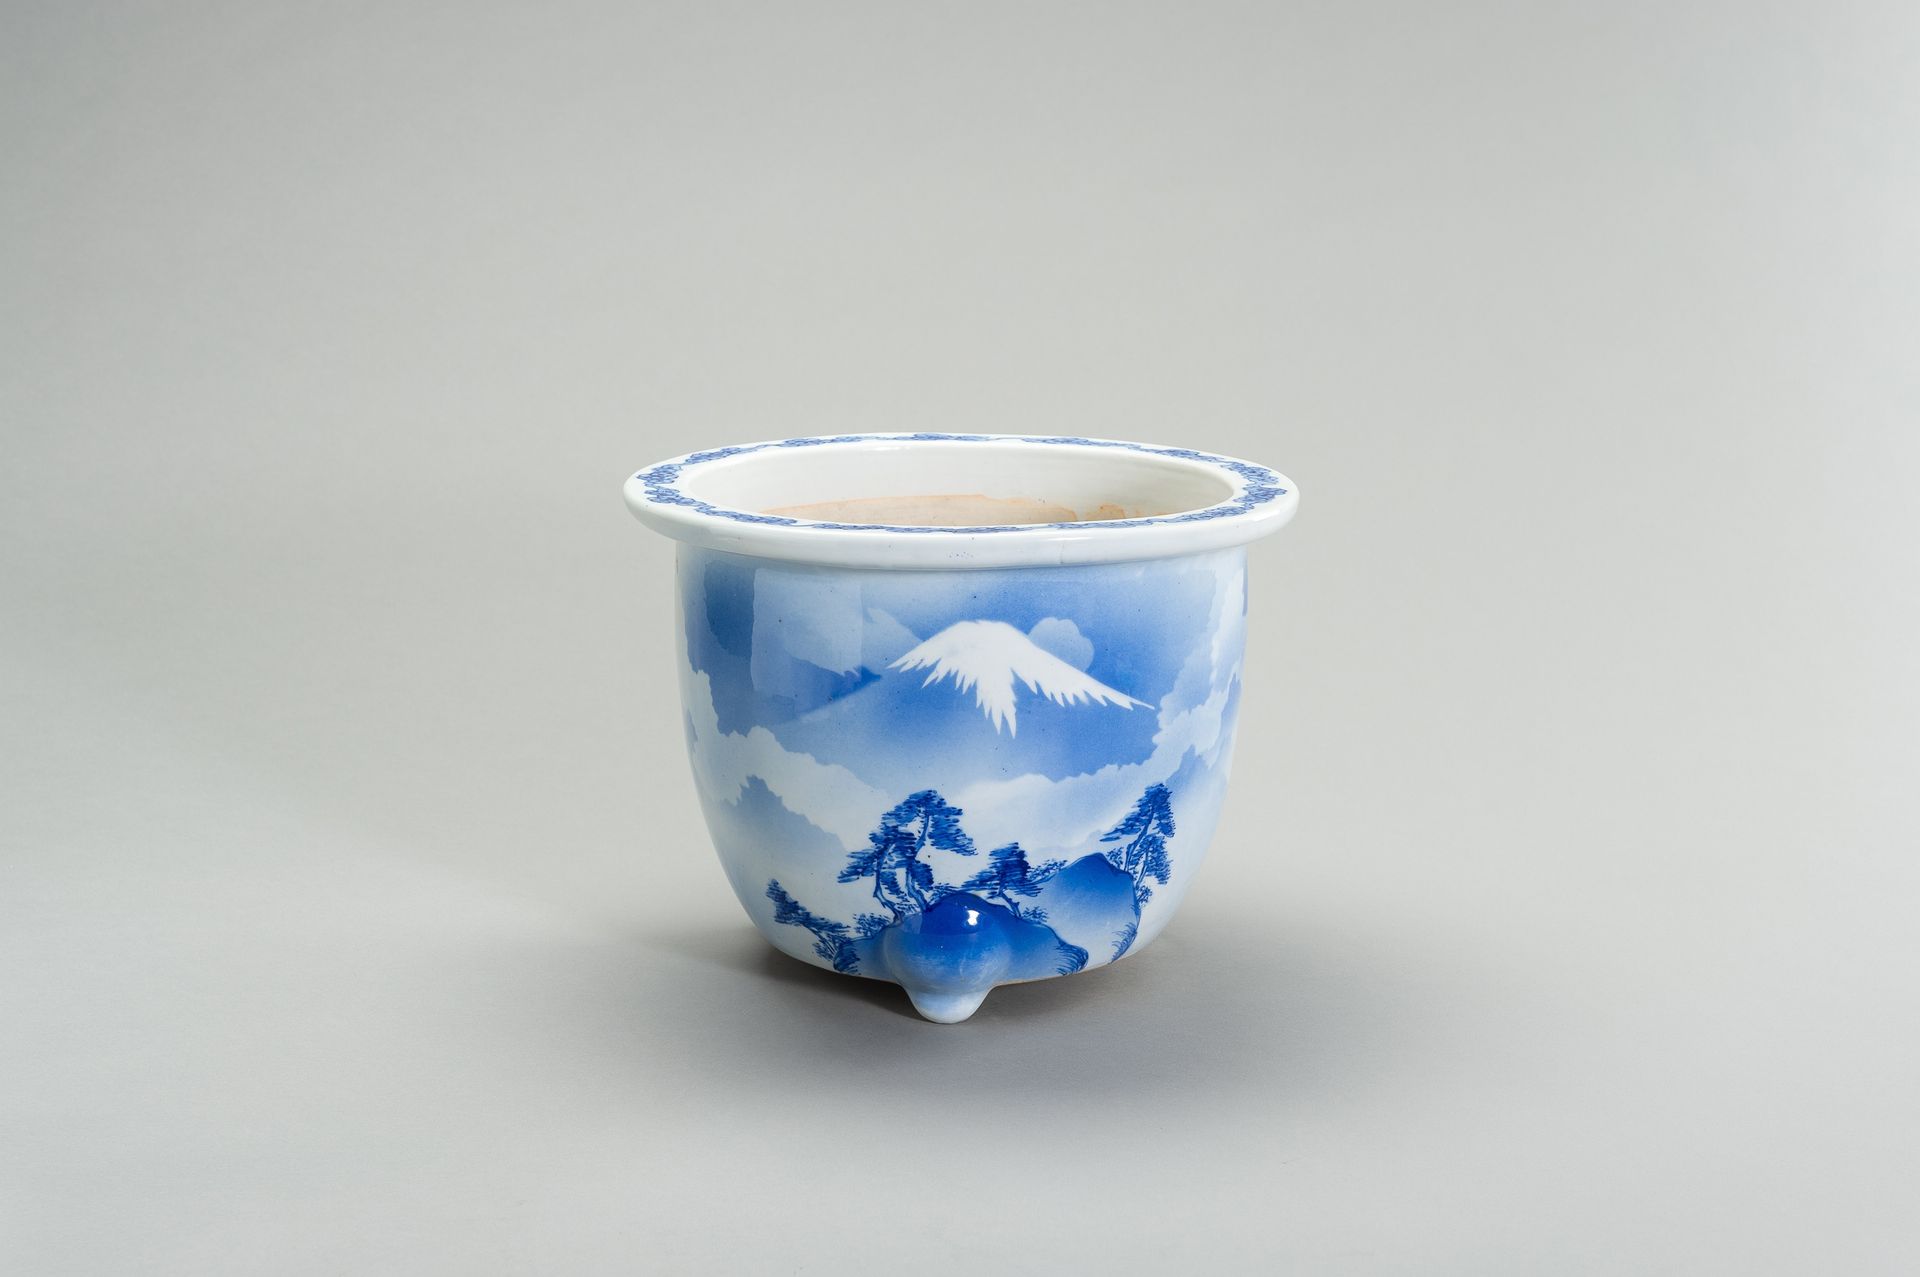 A BLUE AND WHITE PORCELAIN JARDINIERE WITH MOUNT FUJI A BLUE AND WHITE PORCELAIN&hellip;